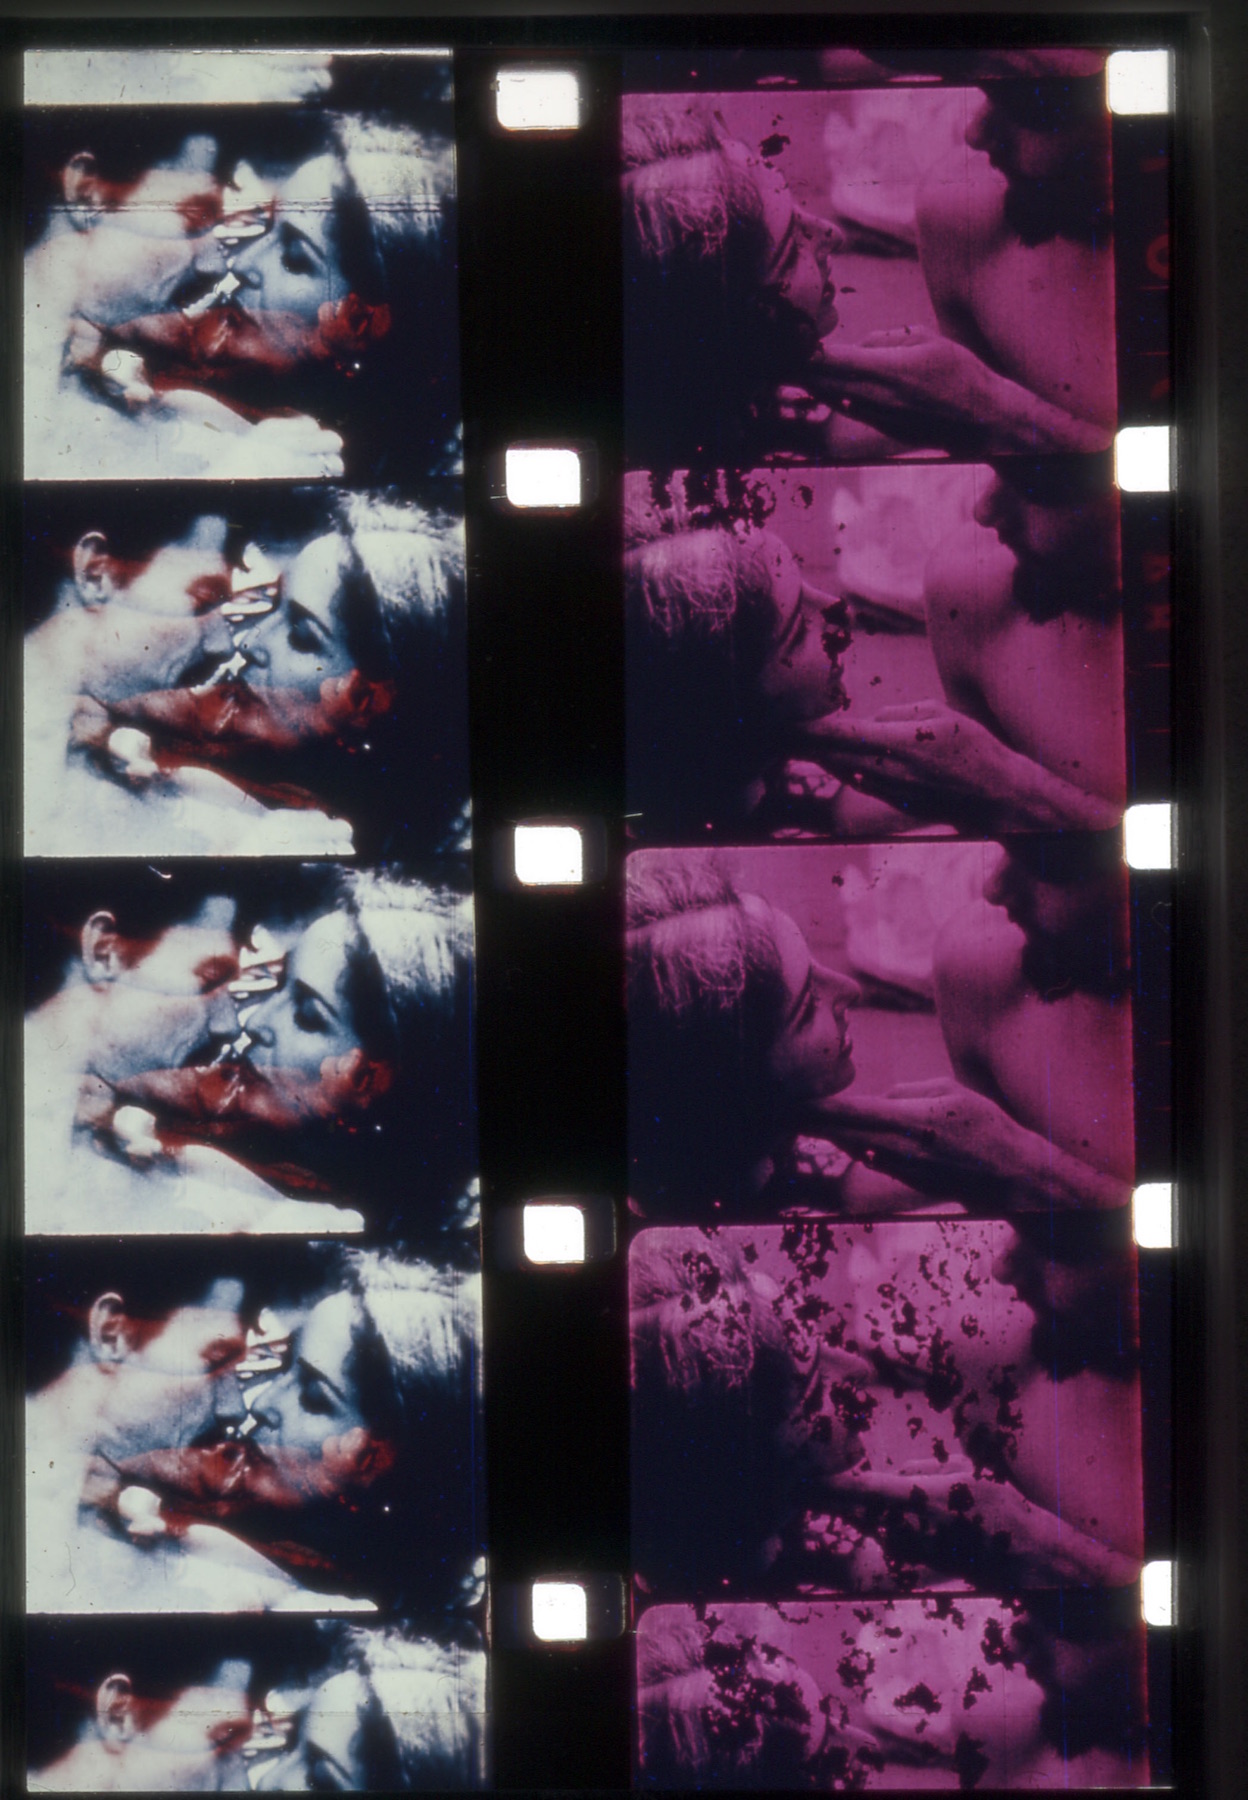 Two film strips side by side of a couple. On the left, they are leaning in as if they are about to kiss. On the right, the man is touching the woman's chin as she gazes up at him.